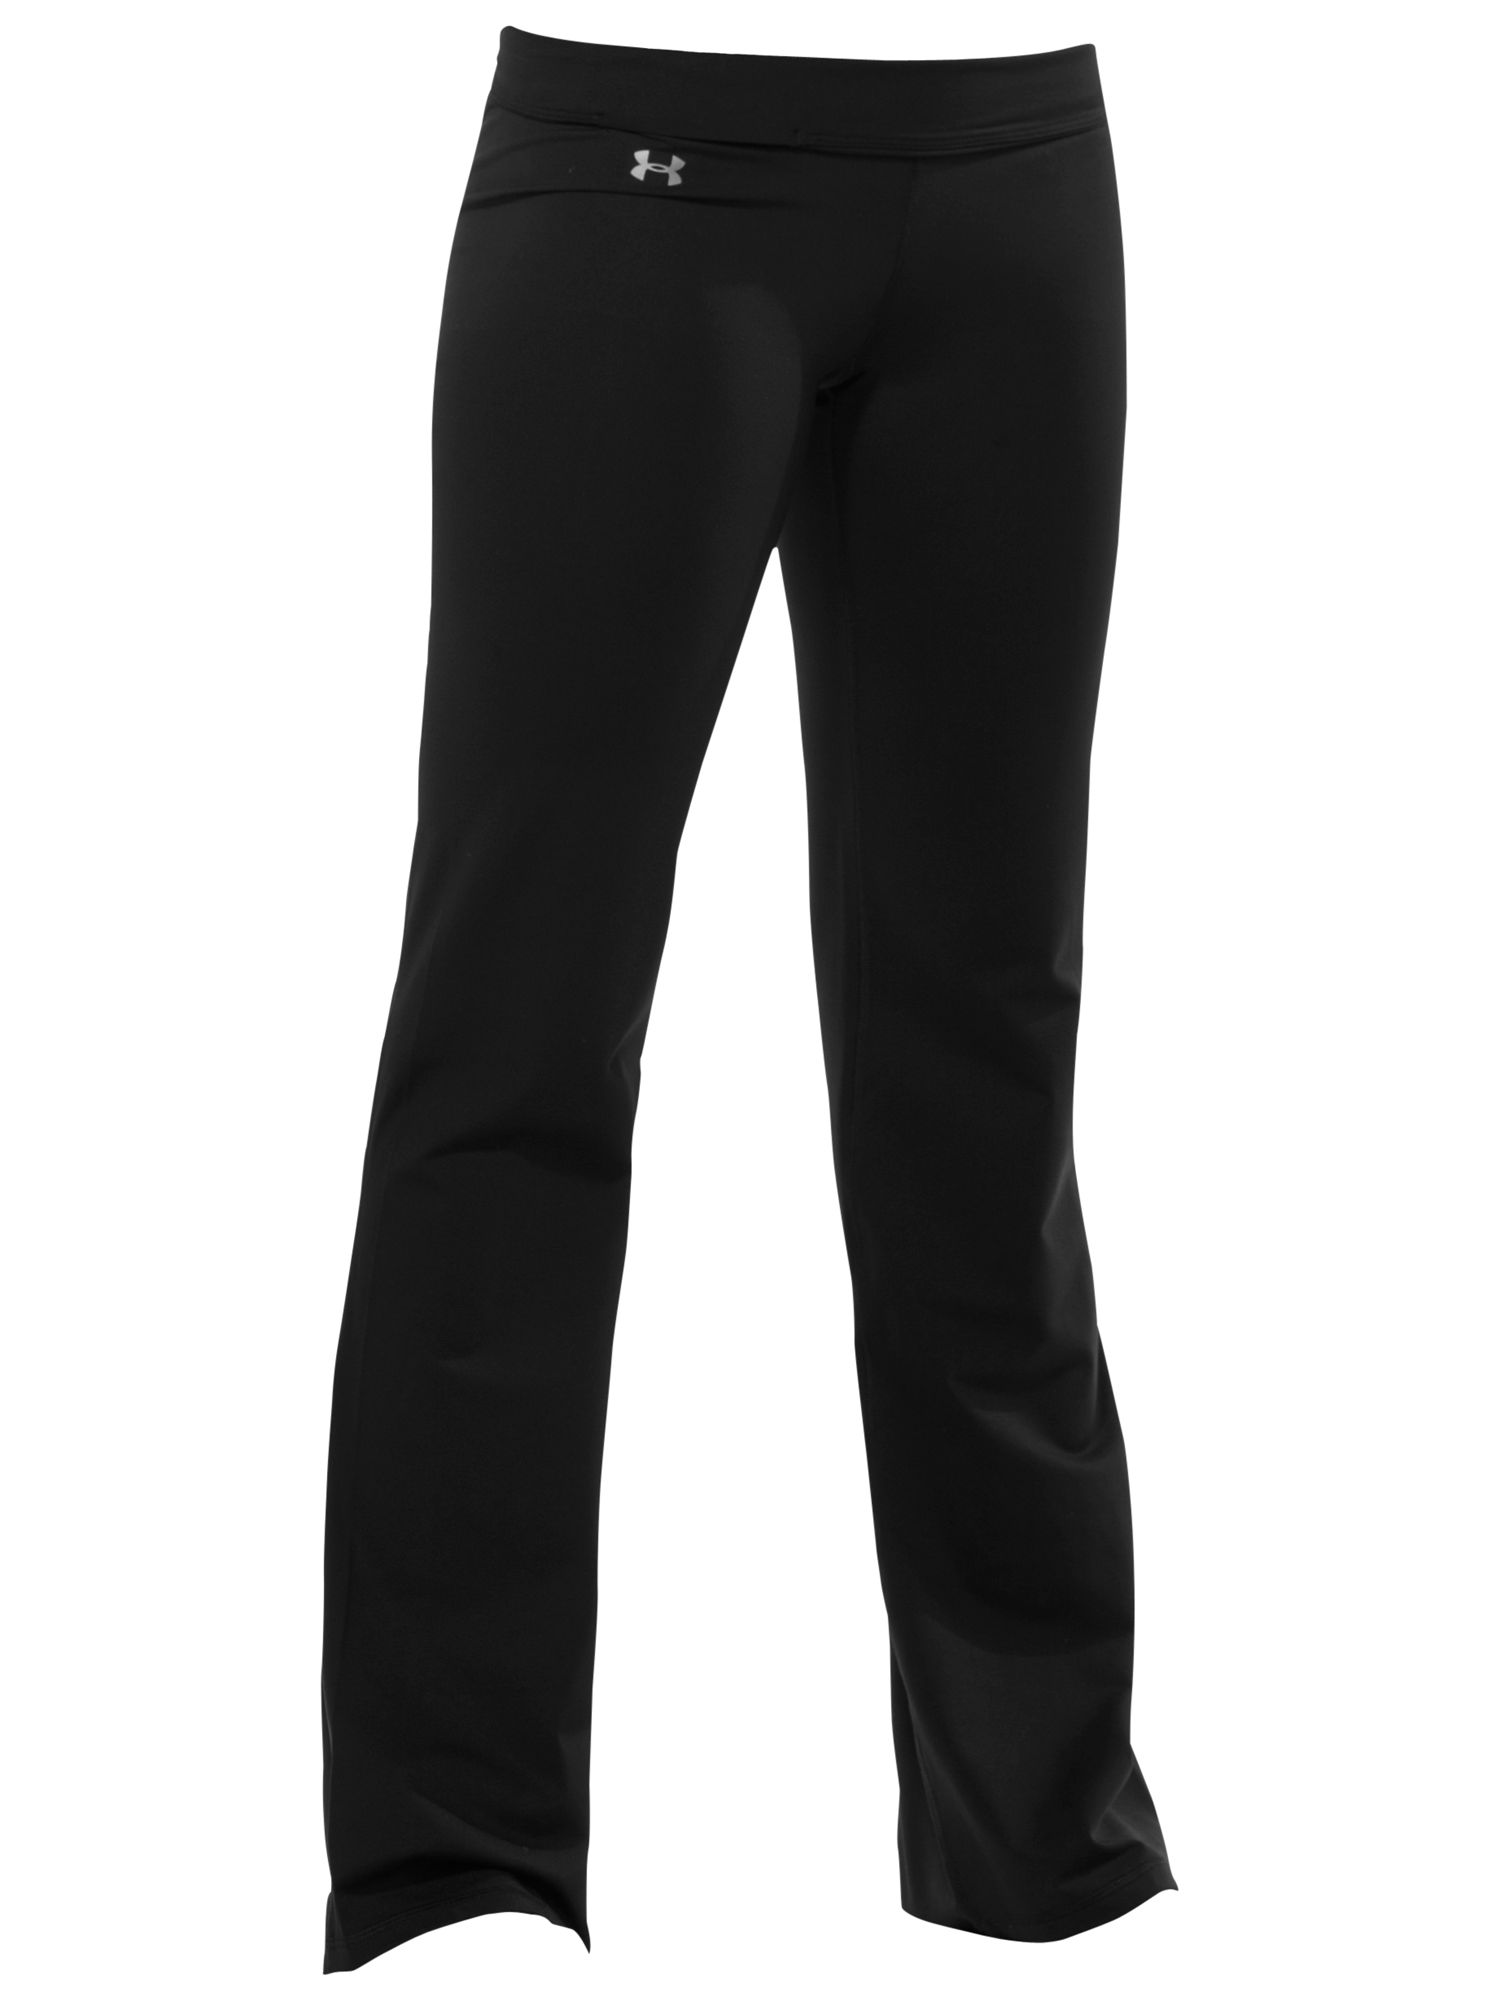 Under Armour Perfect Pant, Black at 